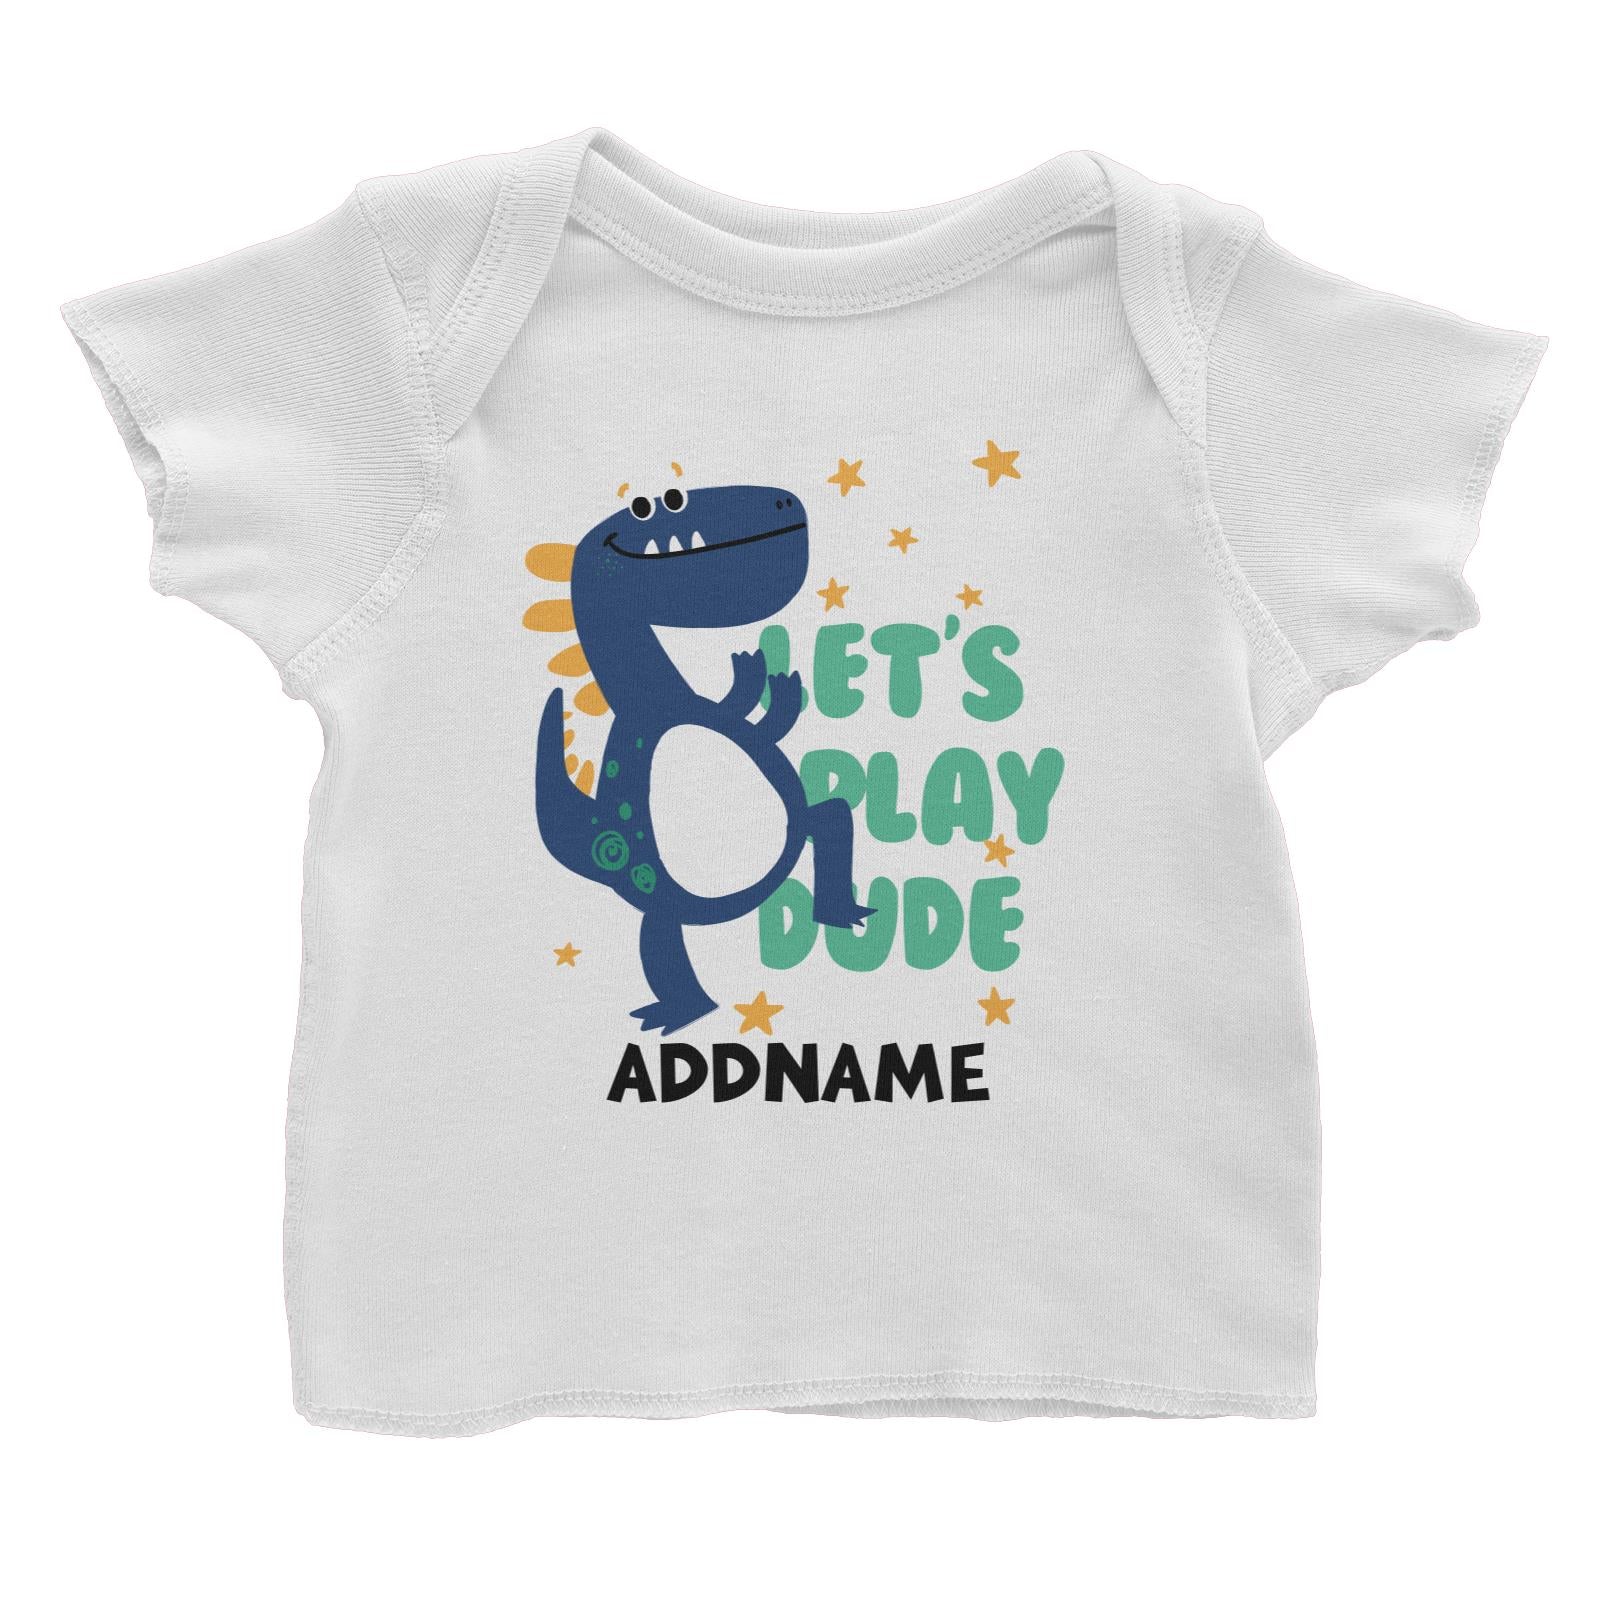 Let's Play Dude Dinosaur Addname Baby T-Shirt